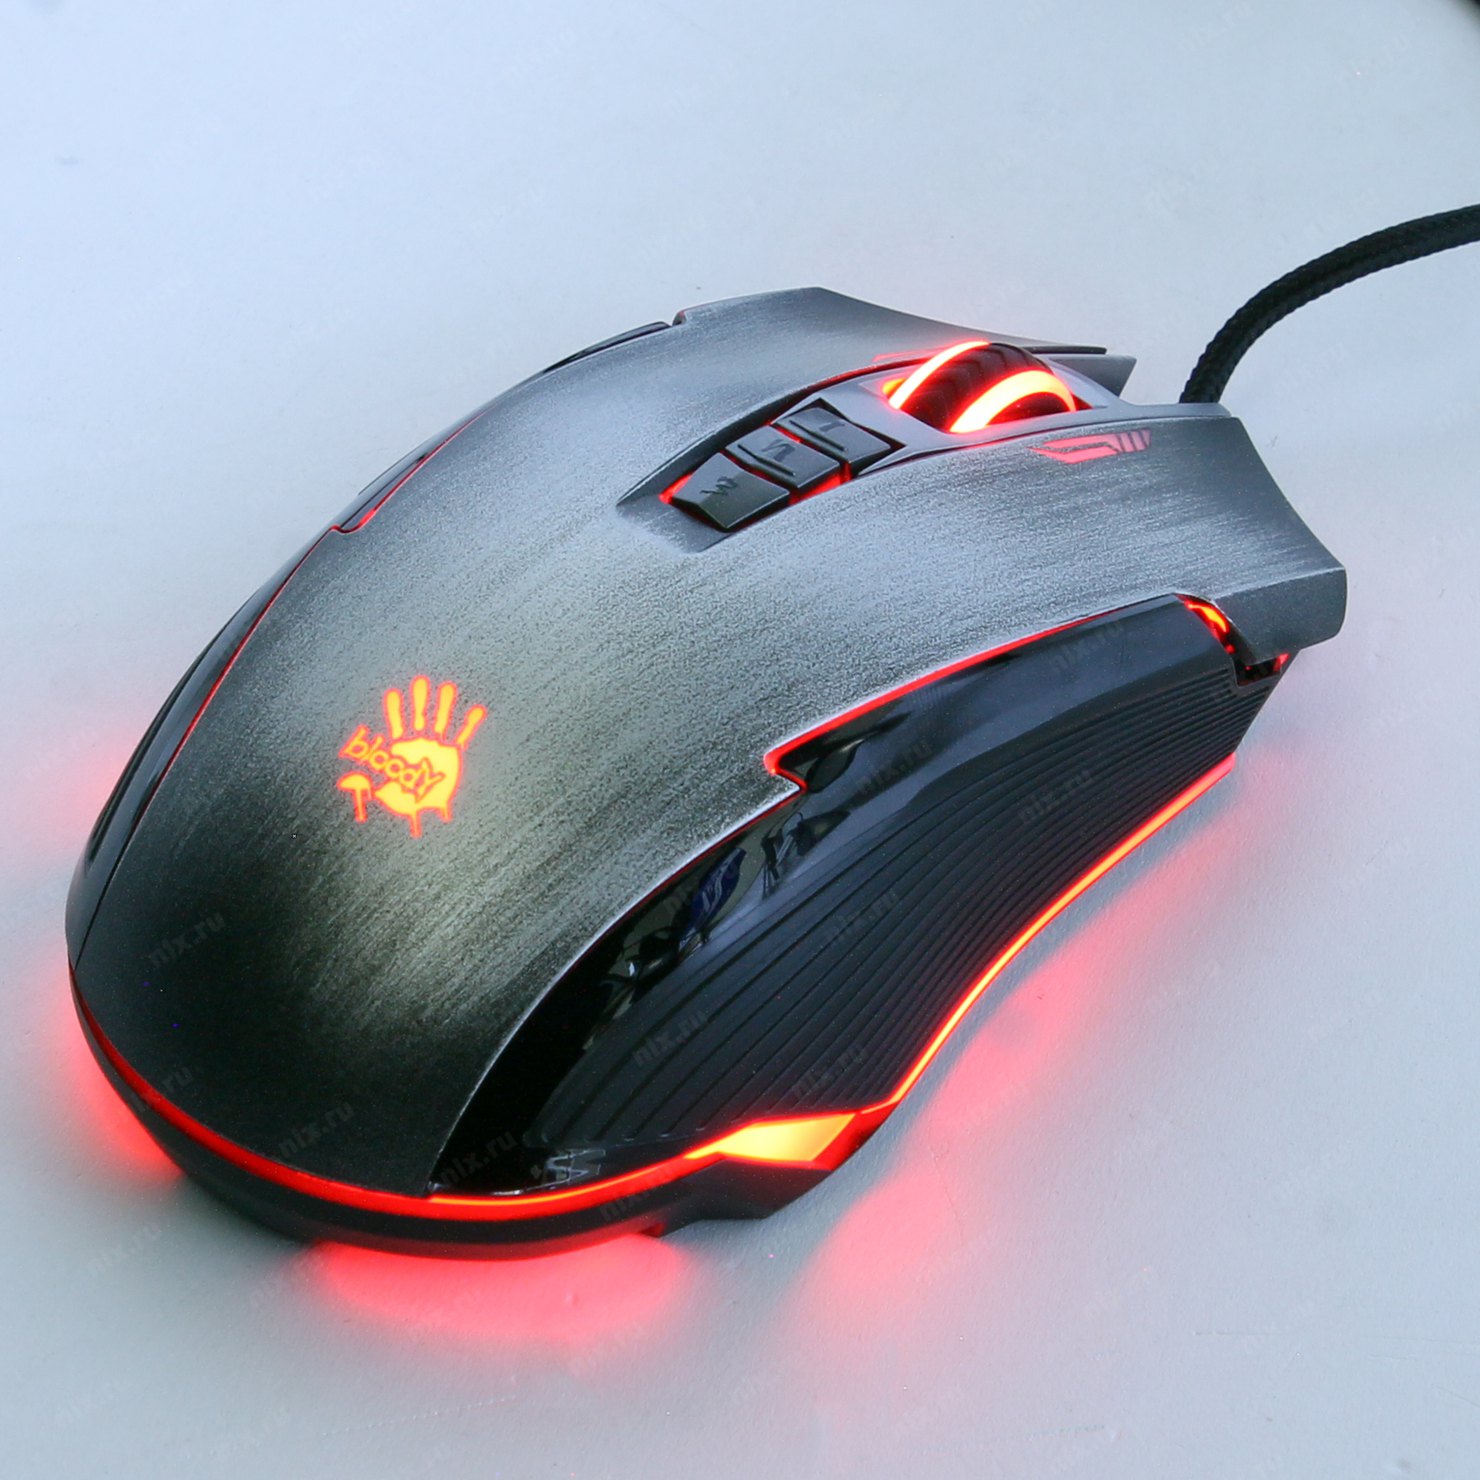 A4tech P93 GAMING MOUSE%20(1)